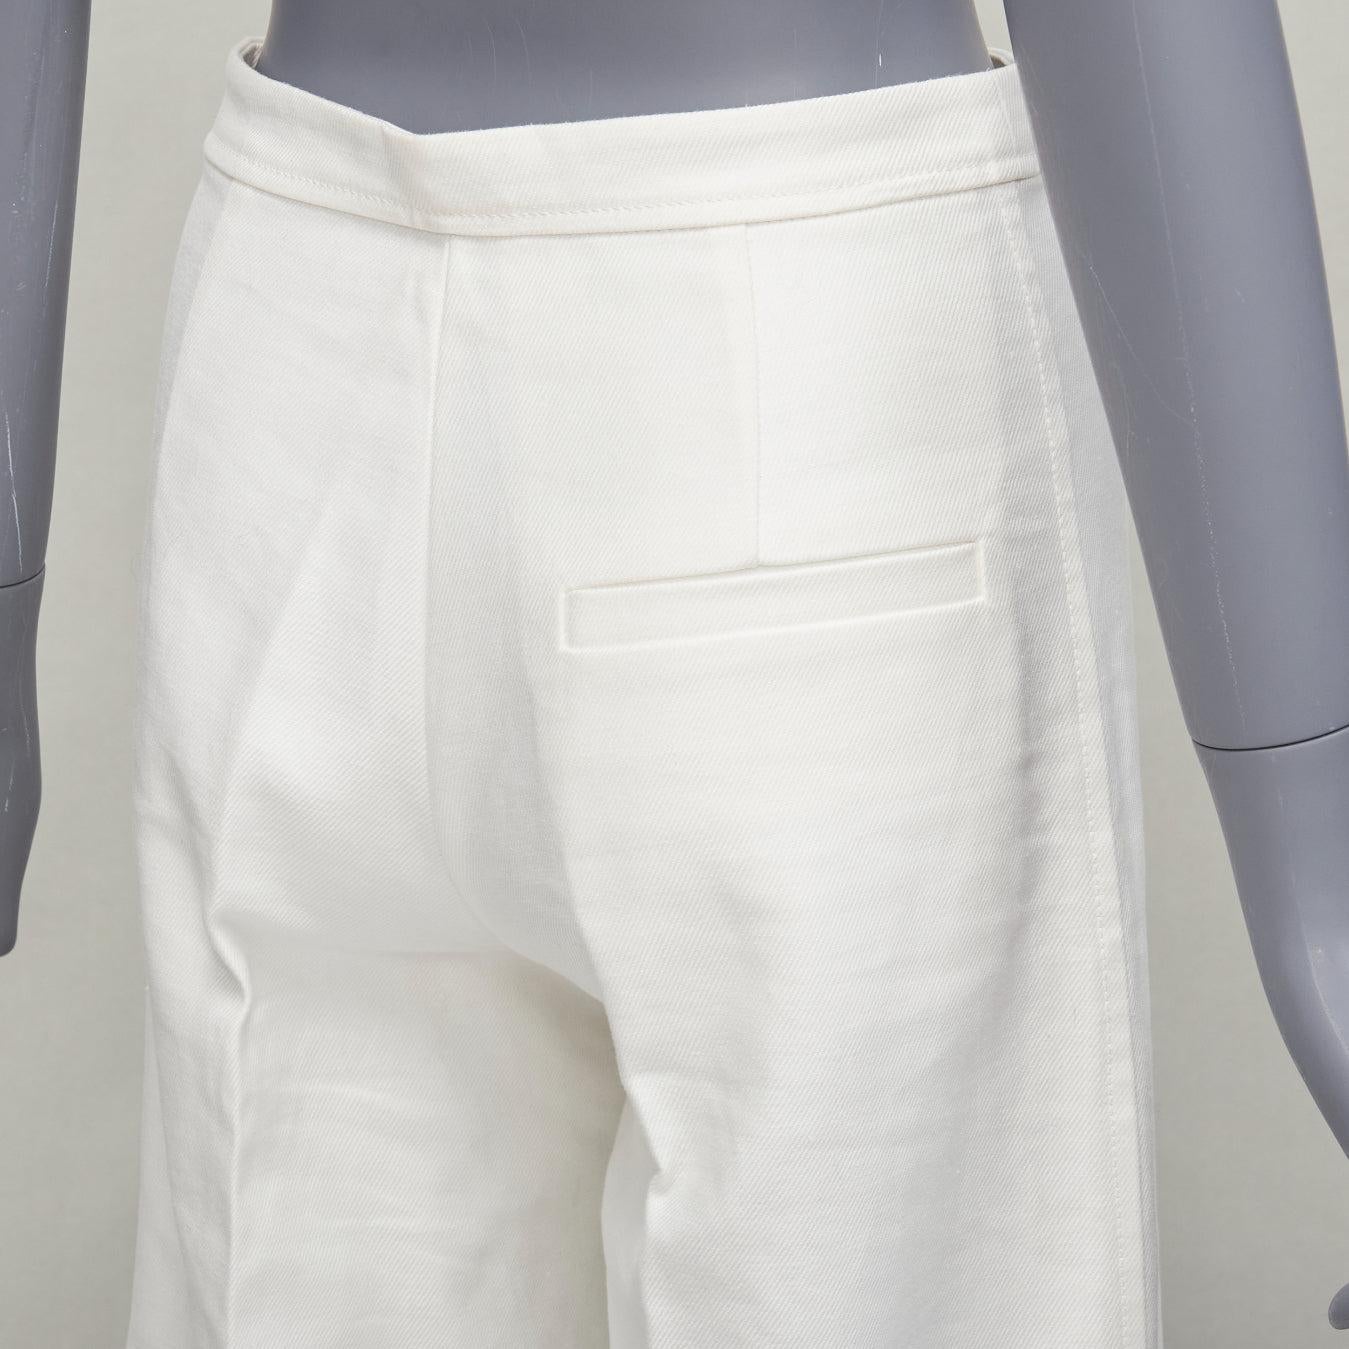 ISABEL MARANT white cotton linen high waist wide leg cropped pants FR36 S
Reference: NKLL/A00210
Brand: Isabel Marant
Material: Cotton, Linen
Color: White
Pattern: Solid
Closure: Zip Fly
Lining: White Fabric
Extra Details: Back darts.
Made in: